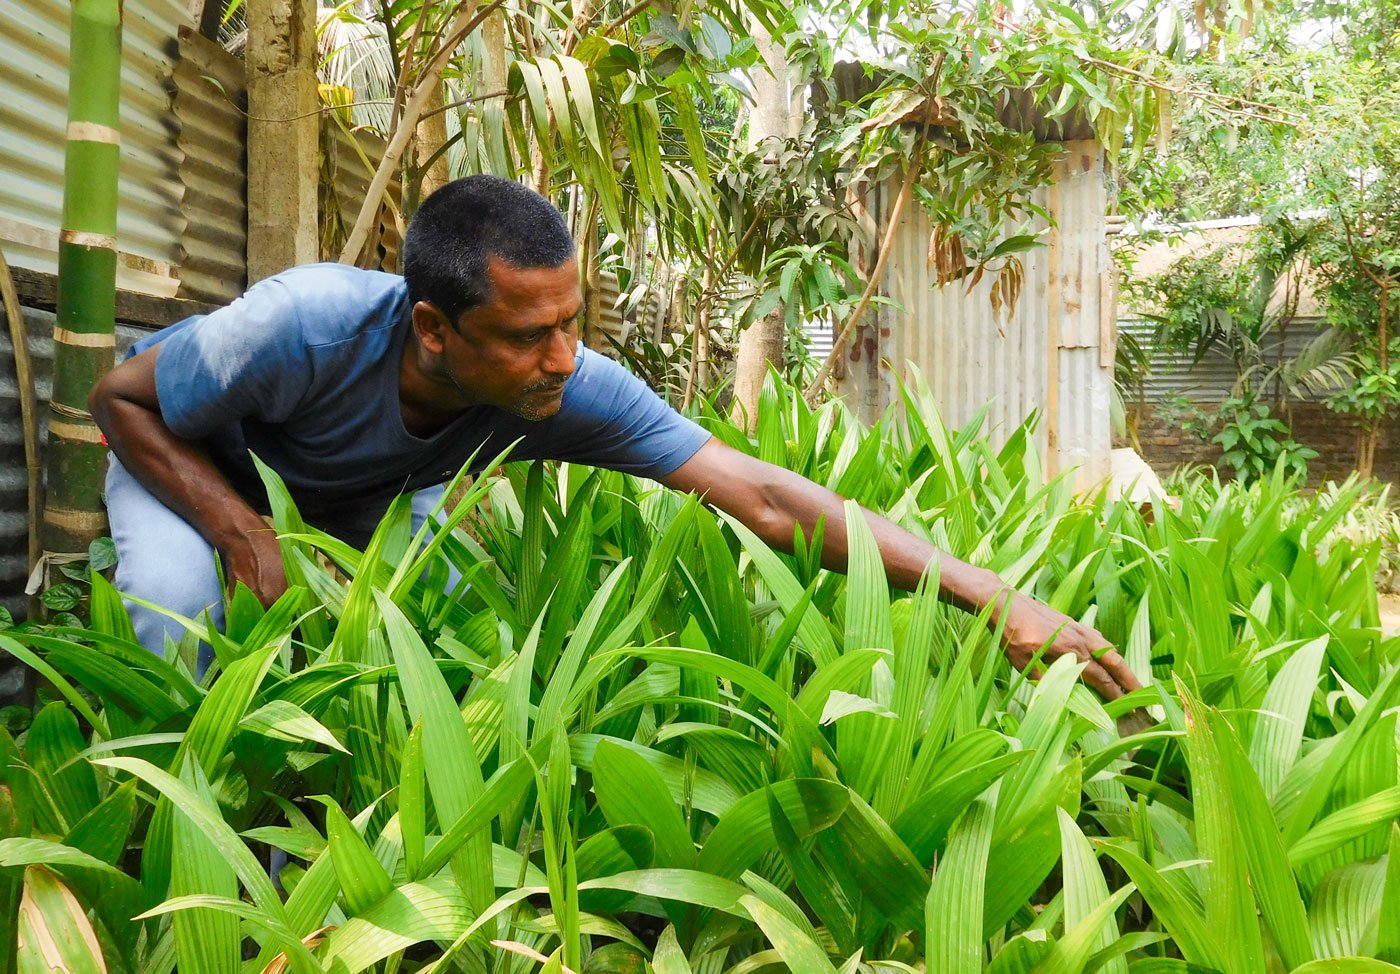 In his backyard, tending to beetle nut seedlings. Seeds are checked too at the border gate, and seeds of jute and sugarcane are not allowed – anything that grows more than three-feet high is not allowed to grow so that visibility is not obstructed